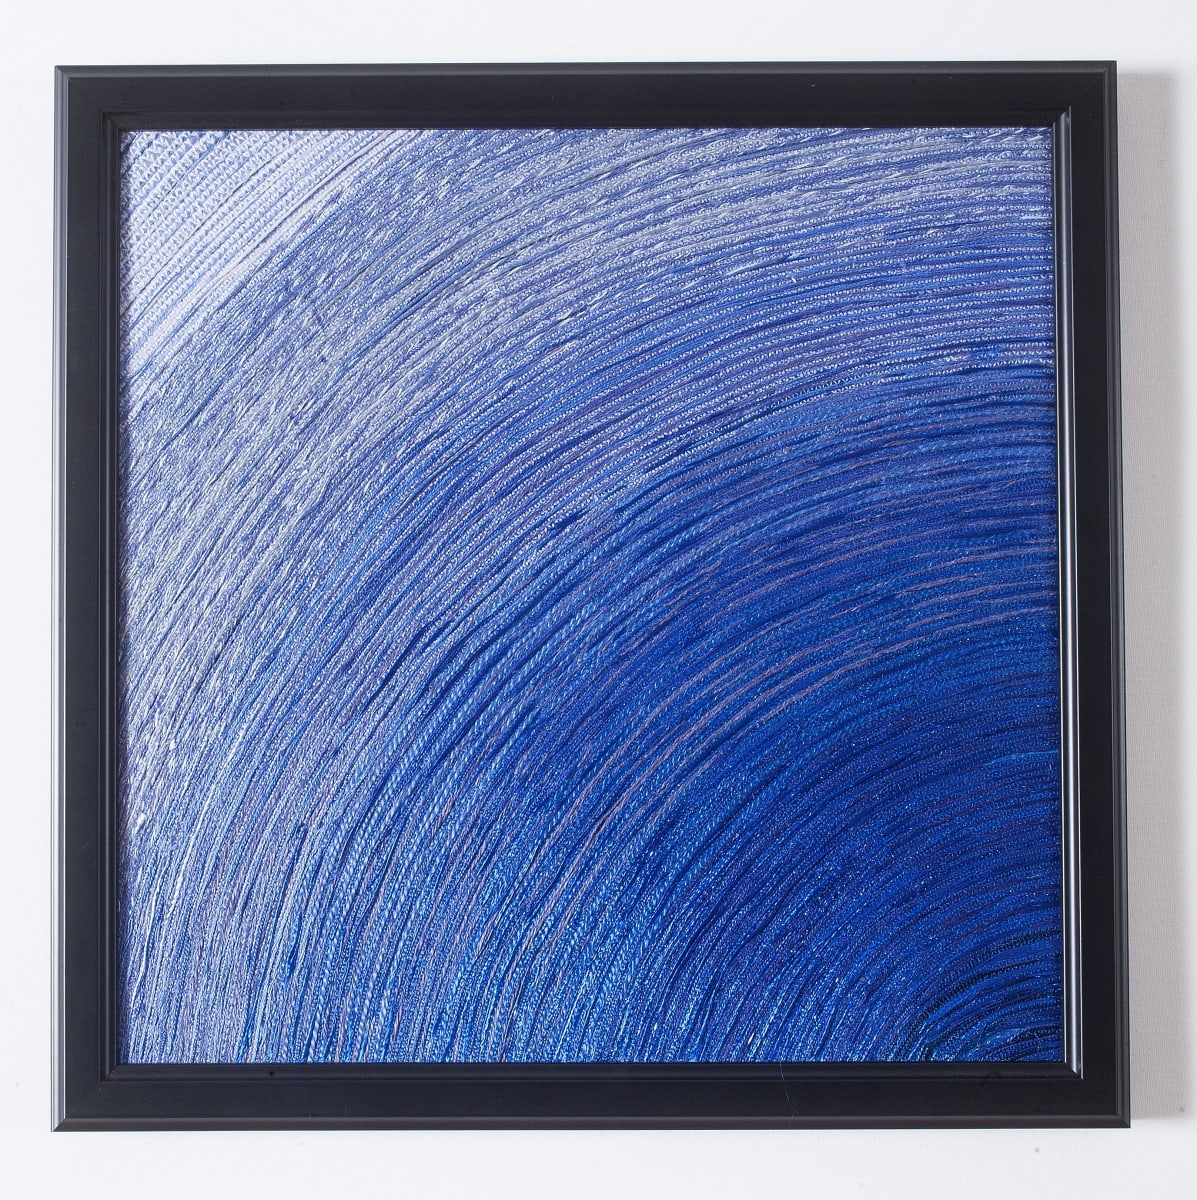 Synesthesia #12 Blue-violet by Lesley Turner  Image: Lesley Turner, 'Synesthesia #12 Blue-violet', 2017, 13" x 13" x 0.5". Cotton, linen, wool, polyester threads. As an expression of the color’s radiating energy through line and value there are no motifs, only a sense of movement to express how I feel about this color. I have explored my understanding of synesthesia. Photo: Tony Bounsall Photo-Design